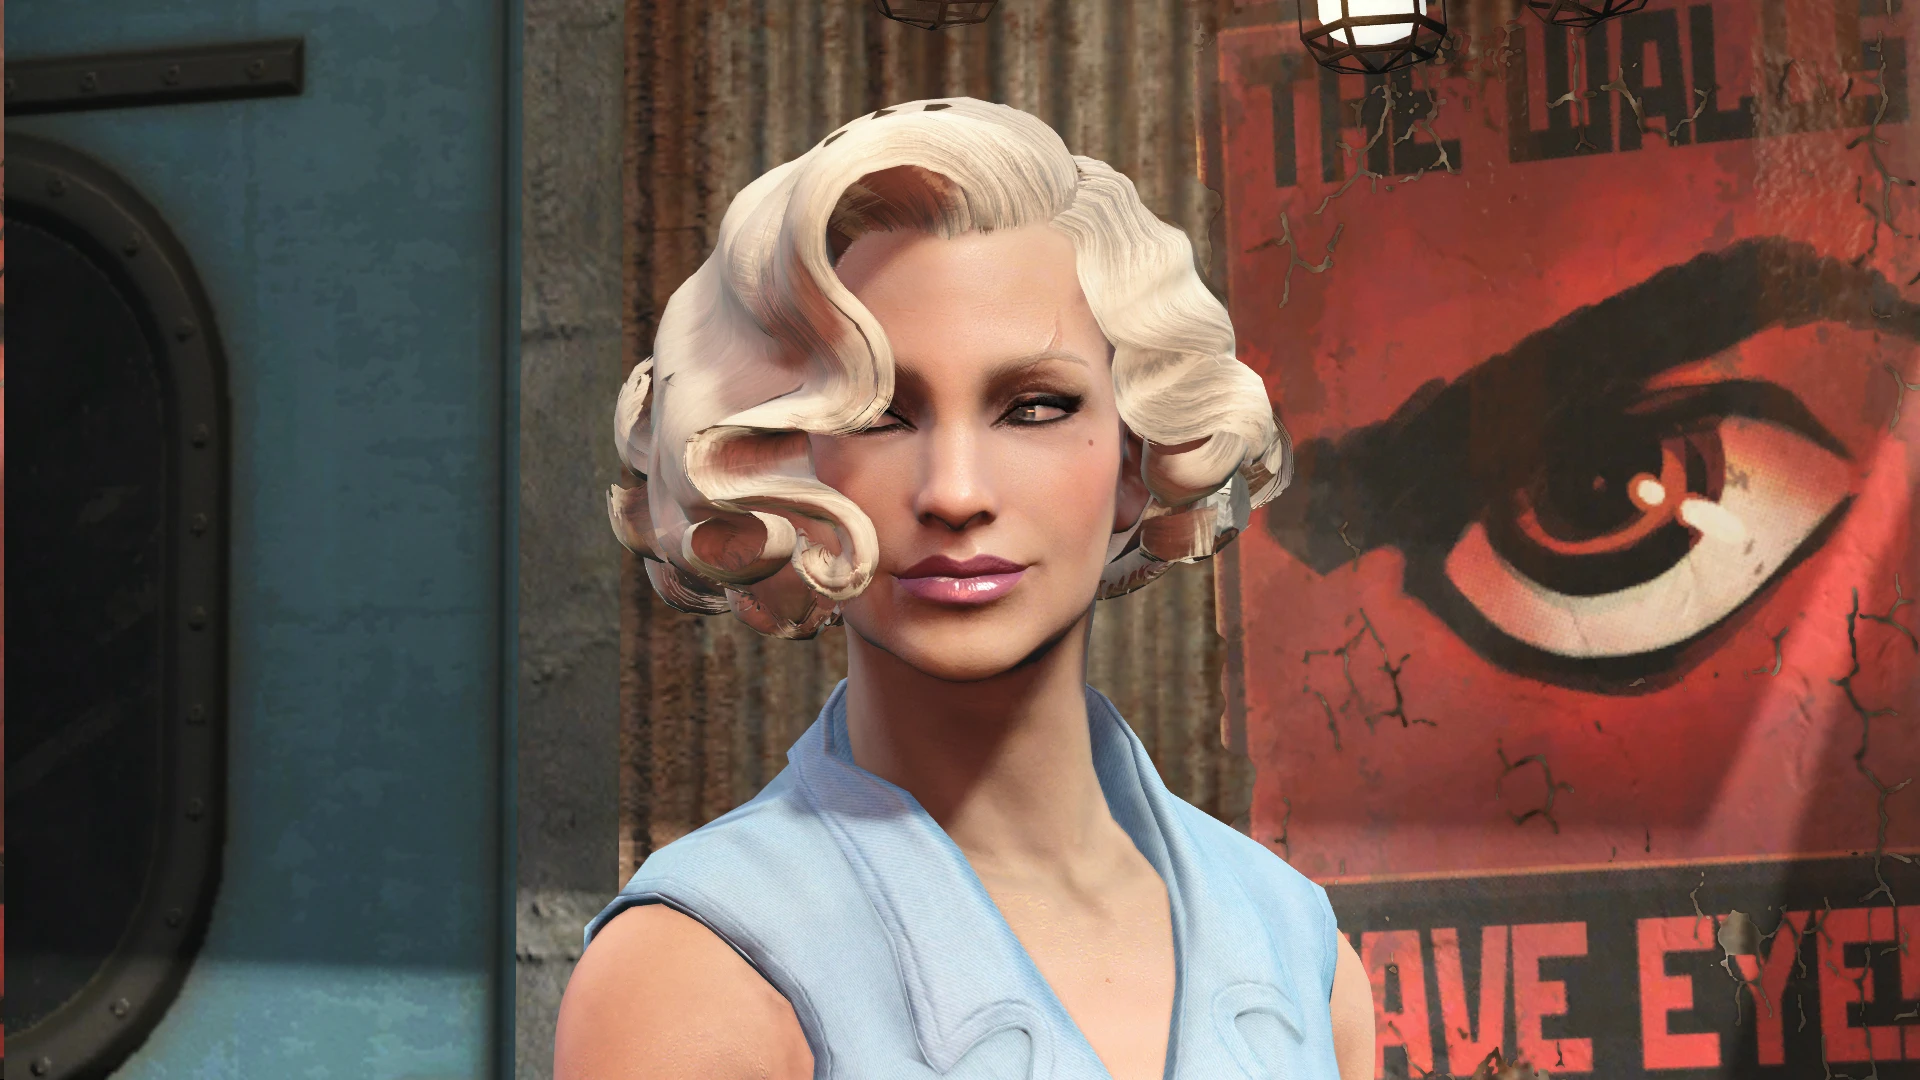 Ponytail hairstyles fallout 4 фото 38